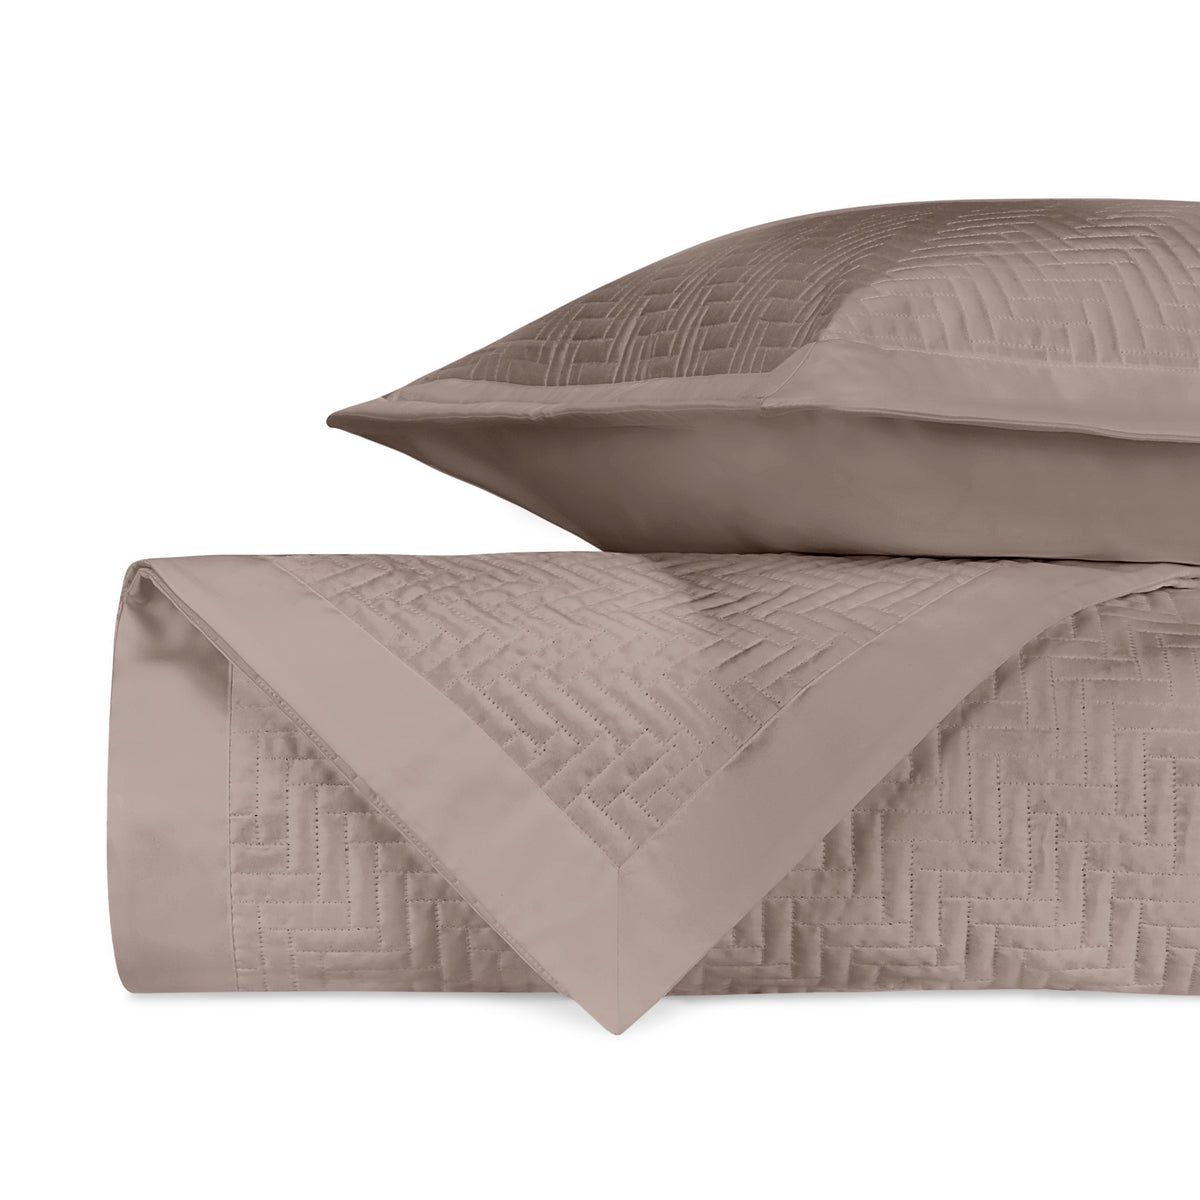 Stack Image of Home Treasures Baxter Royal Sateen Quilted Bedding in Color Mist Gray